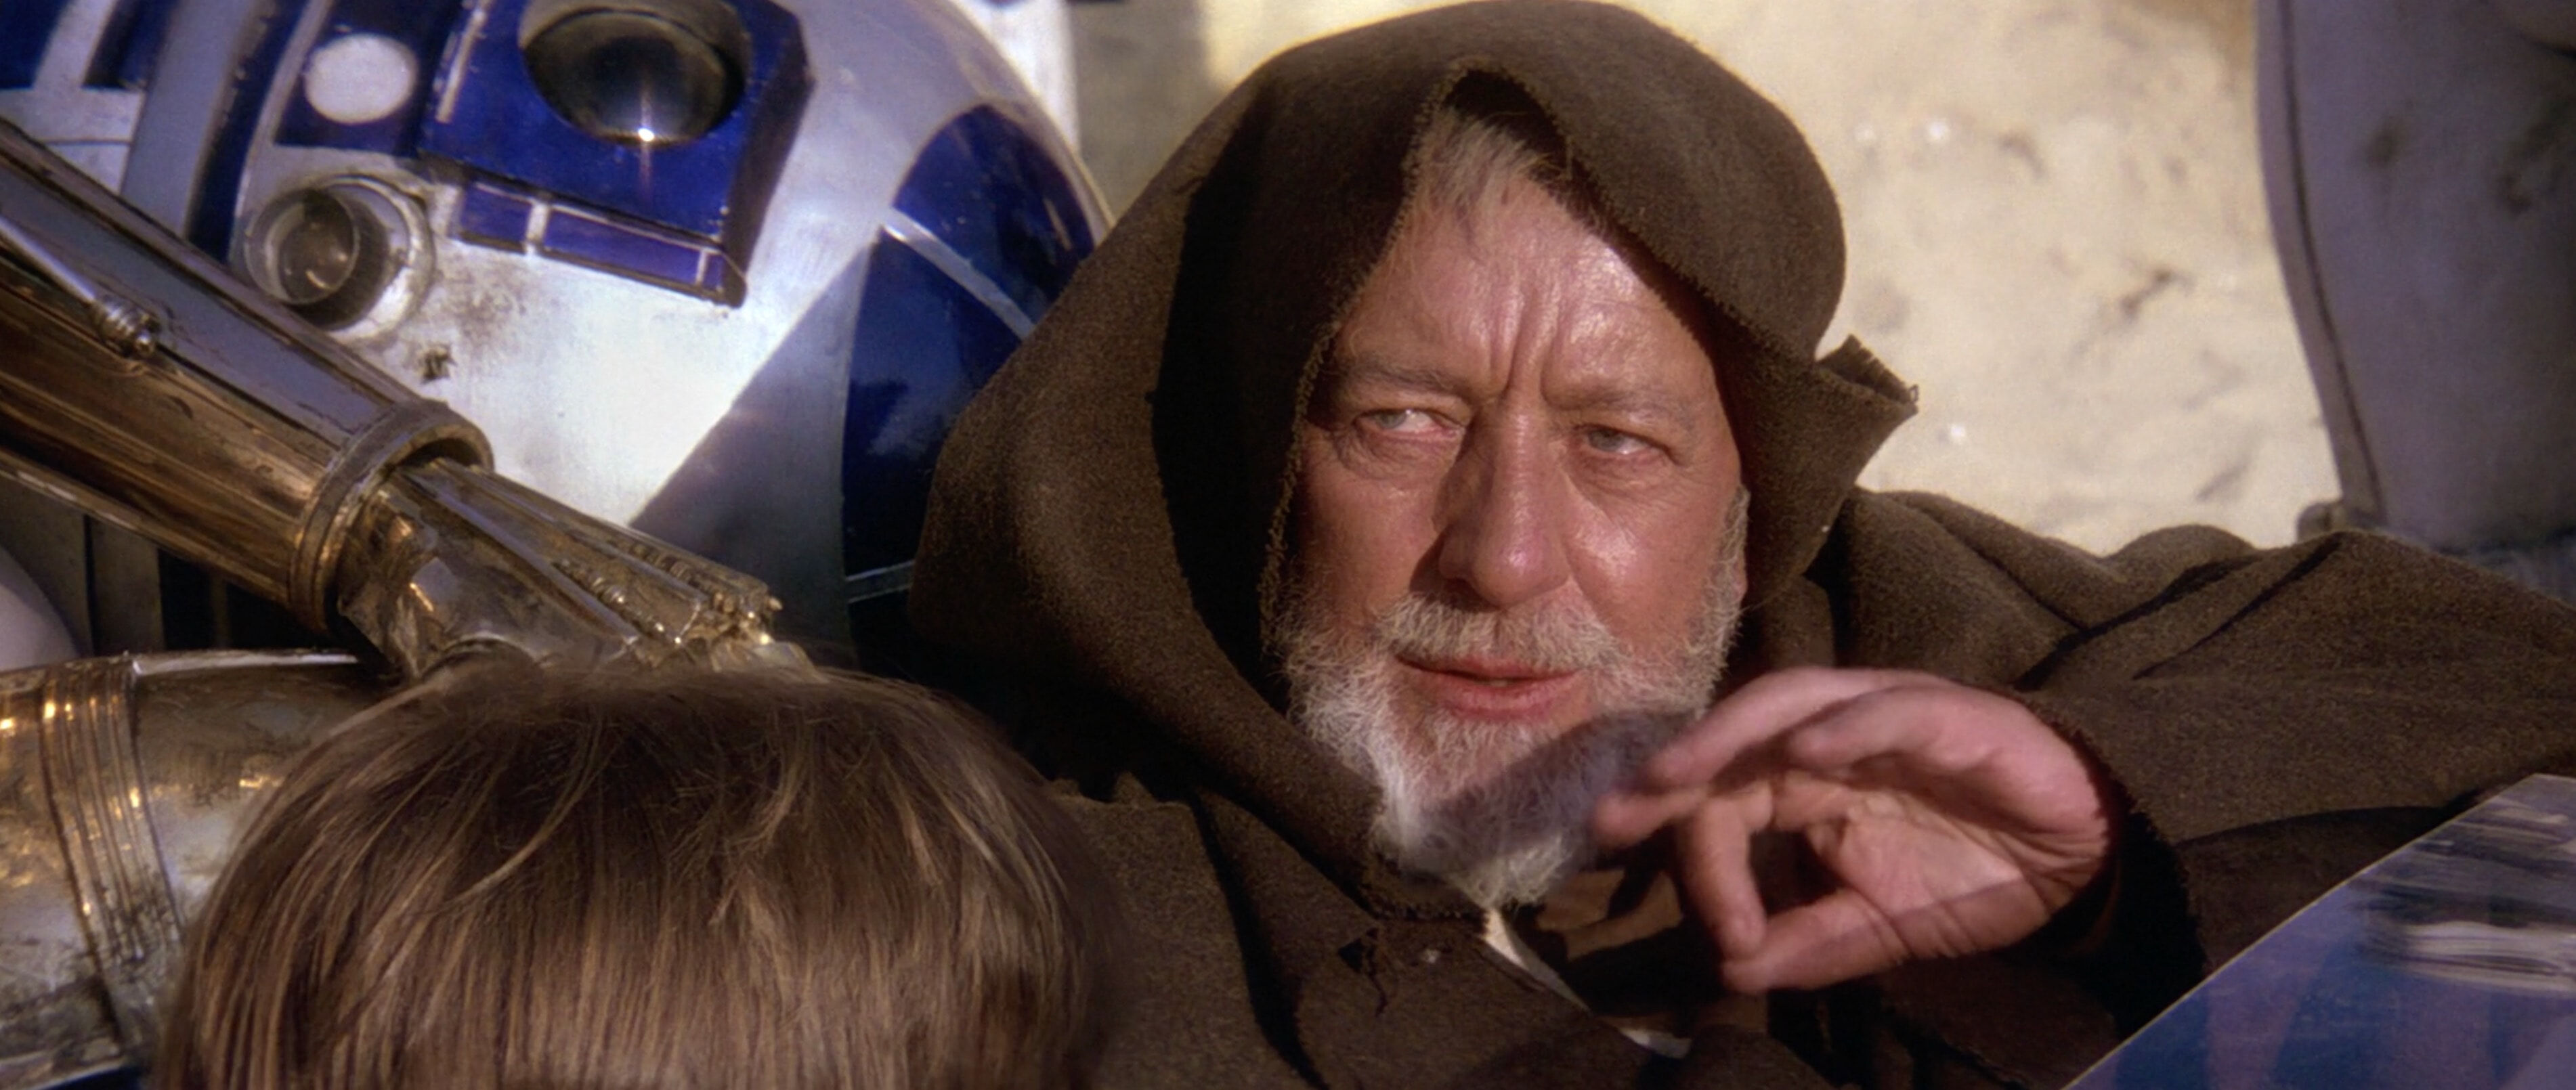 Obi-Wan Kenobi, gesturing to use the Force in the “these aren’t the droids you’re looking for” scene in “Star Wars”.